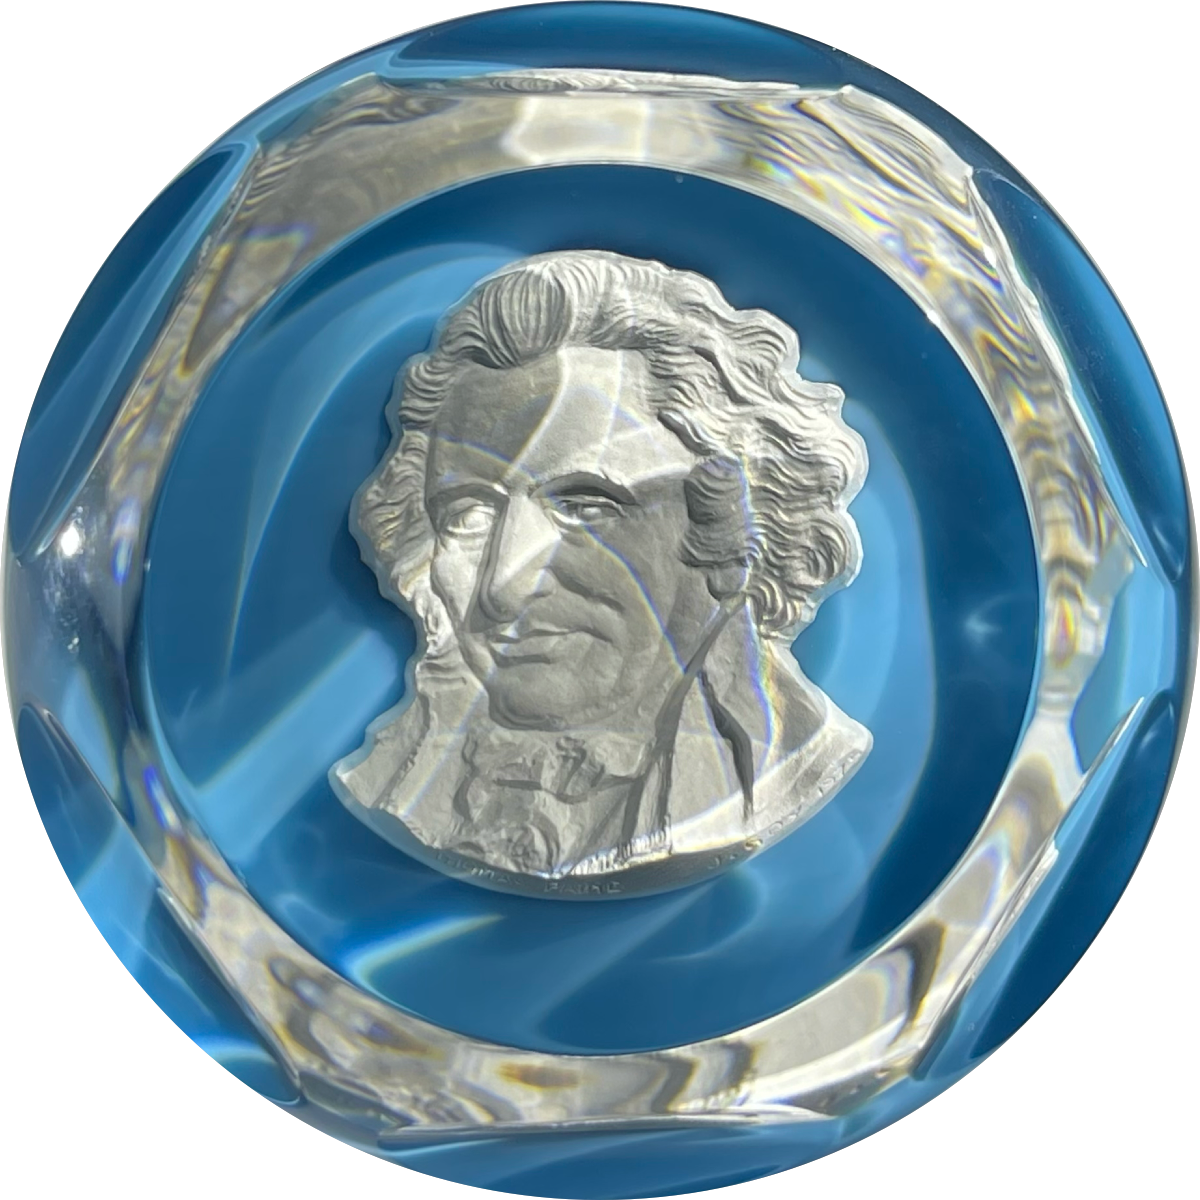 Baccarat Crystal 1976 Thomas Paine Sulphide on Opaque Blue Ground